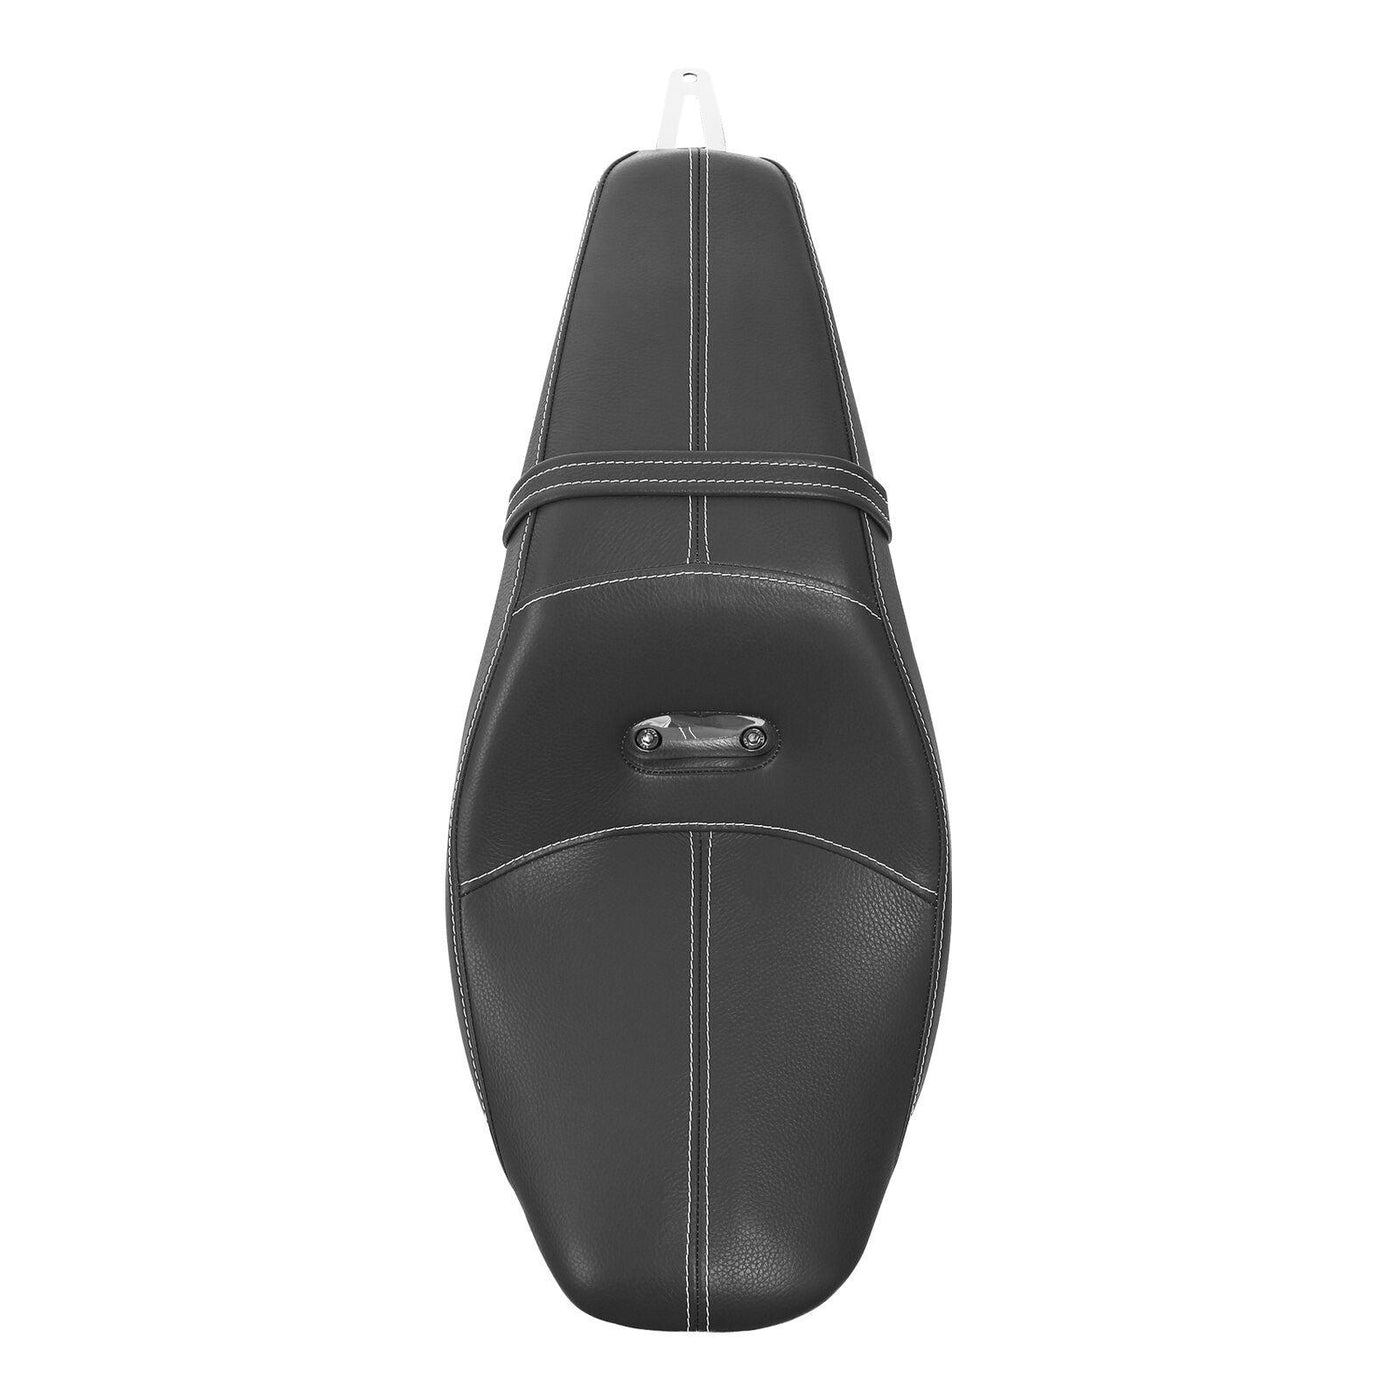 Driver & Passenger Seat Fit For Indian Scout 15-21 Scout Sixty ABS 2019-2020 US - Moto Life Products